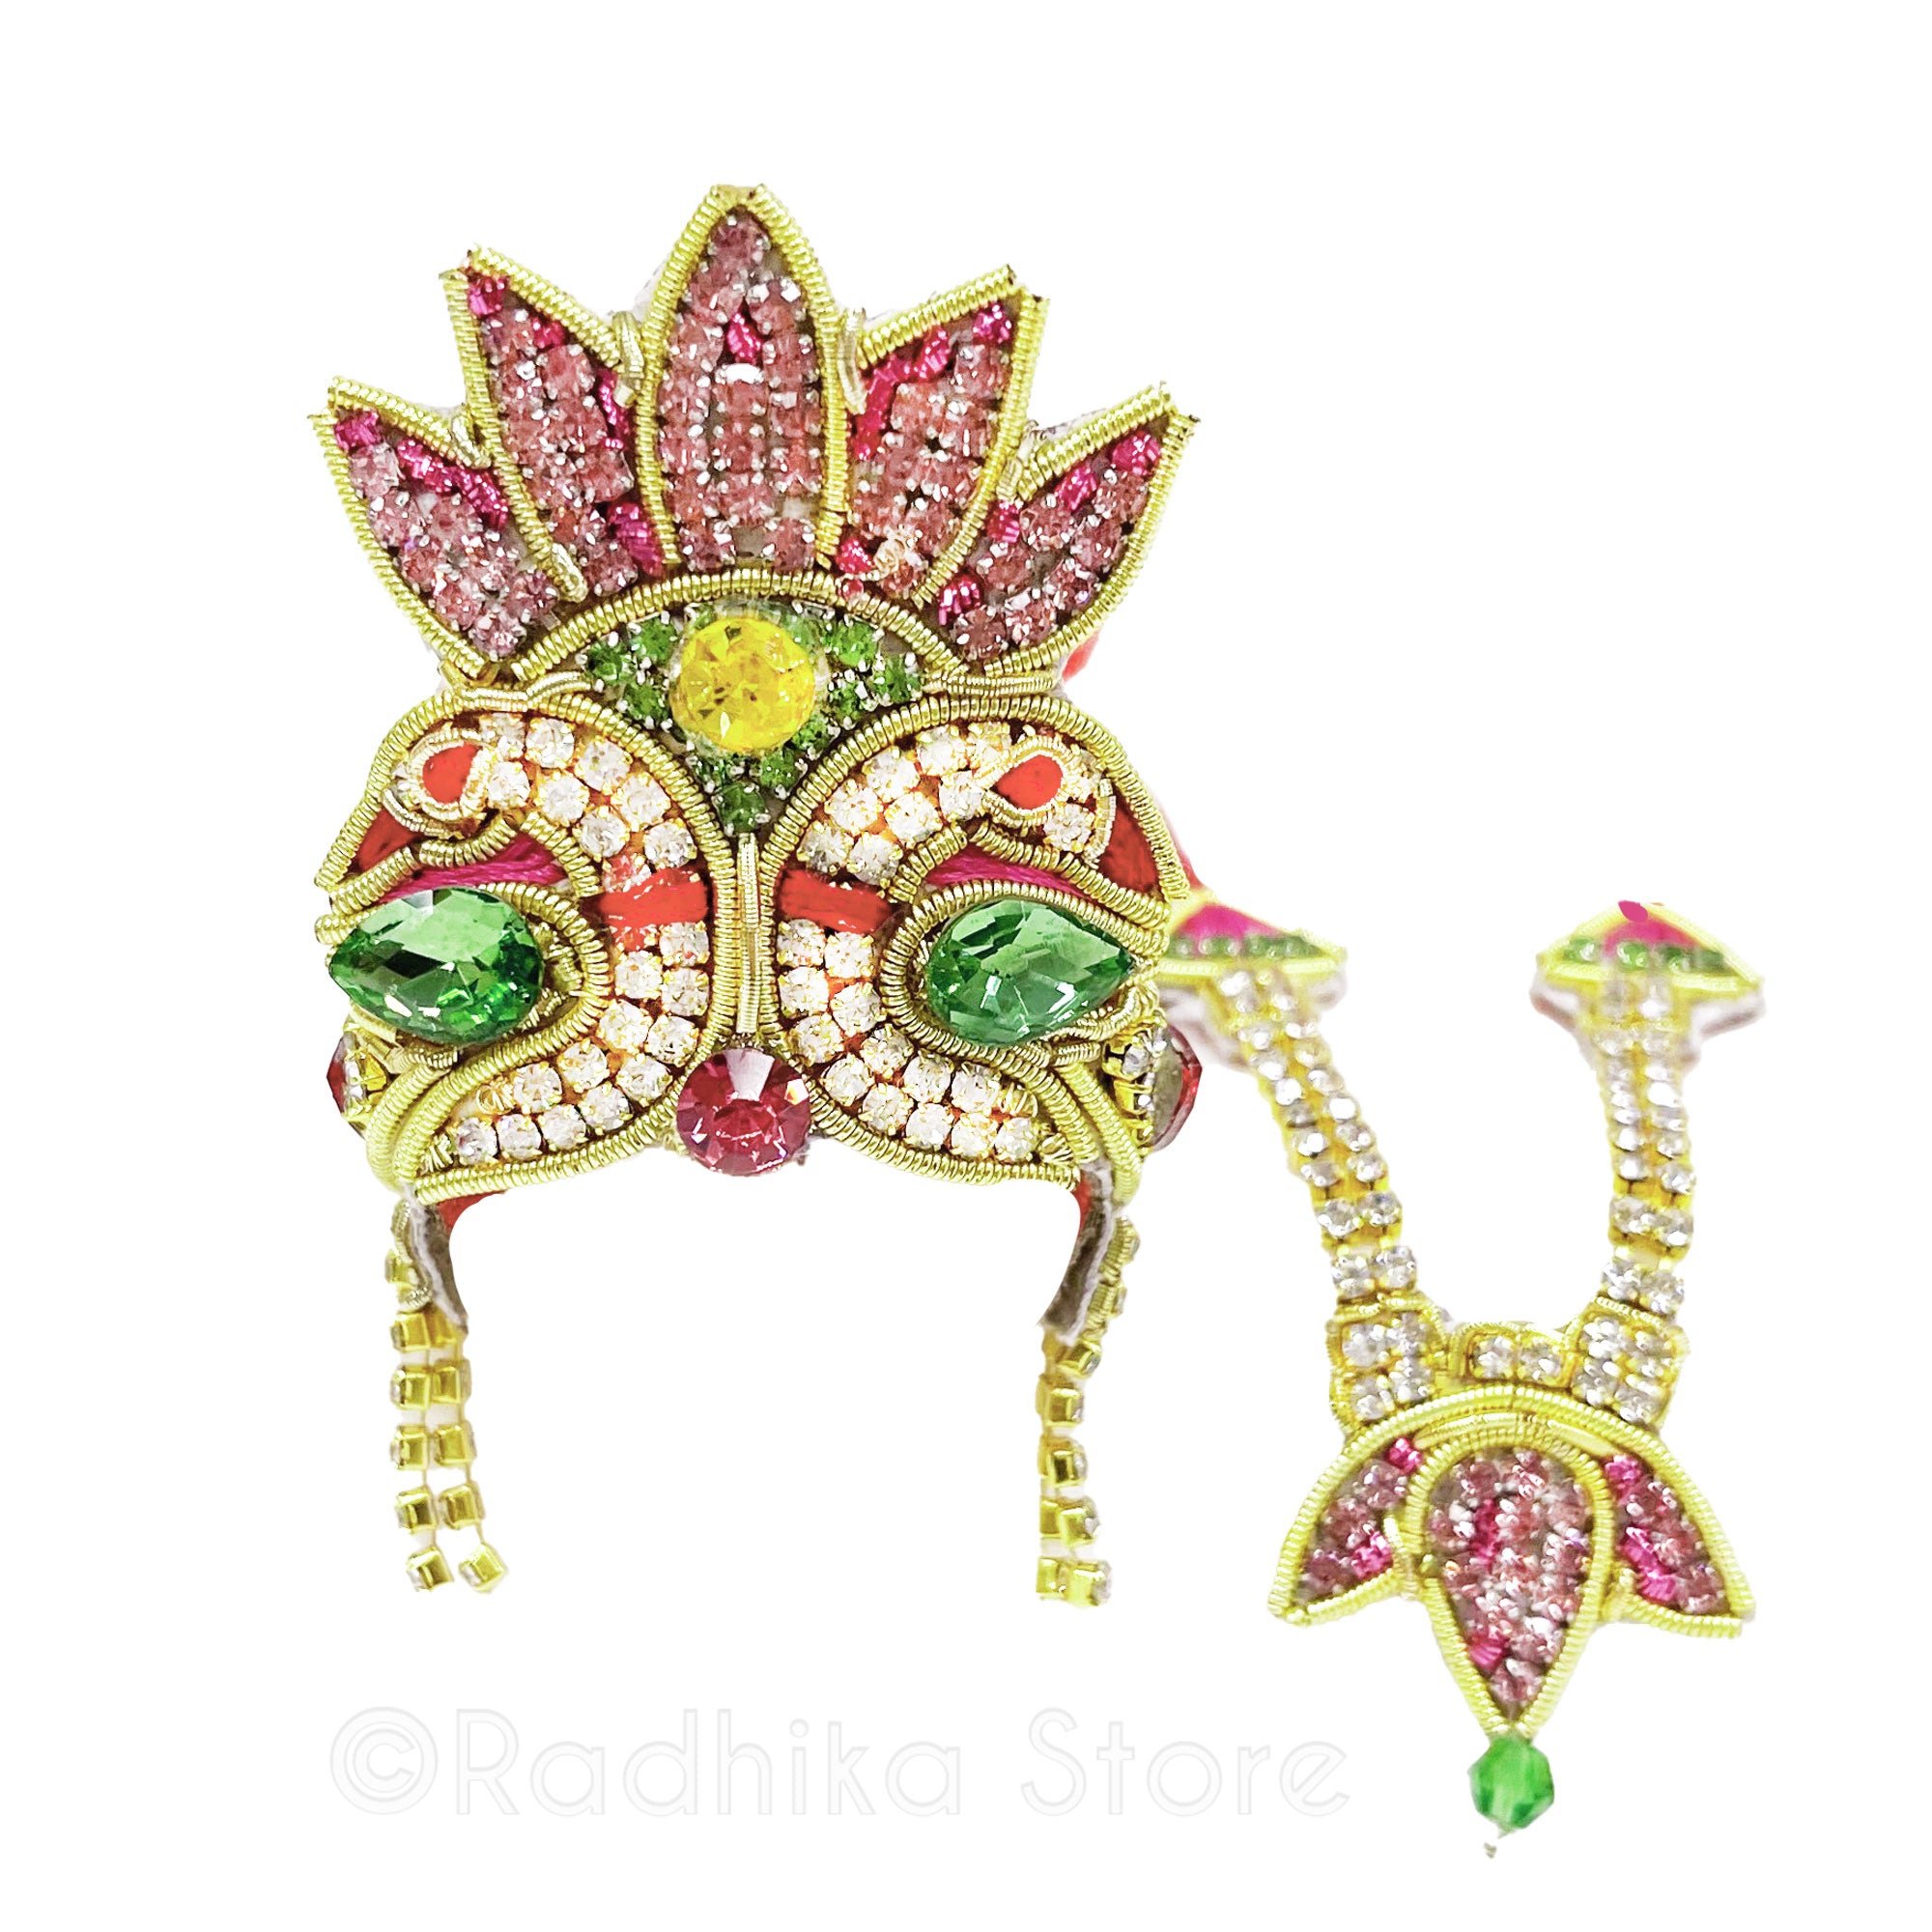 Sporting Lotus Swans - Deity Crown and Necklace Set